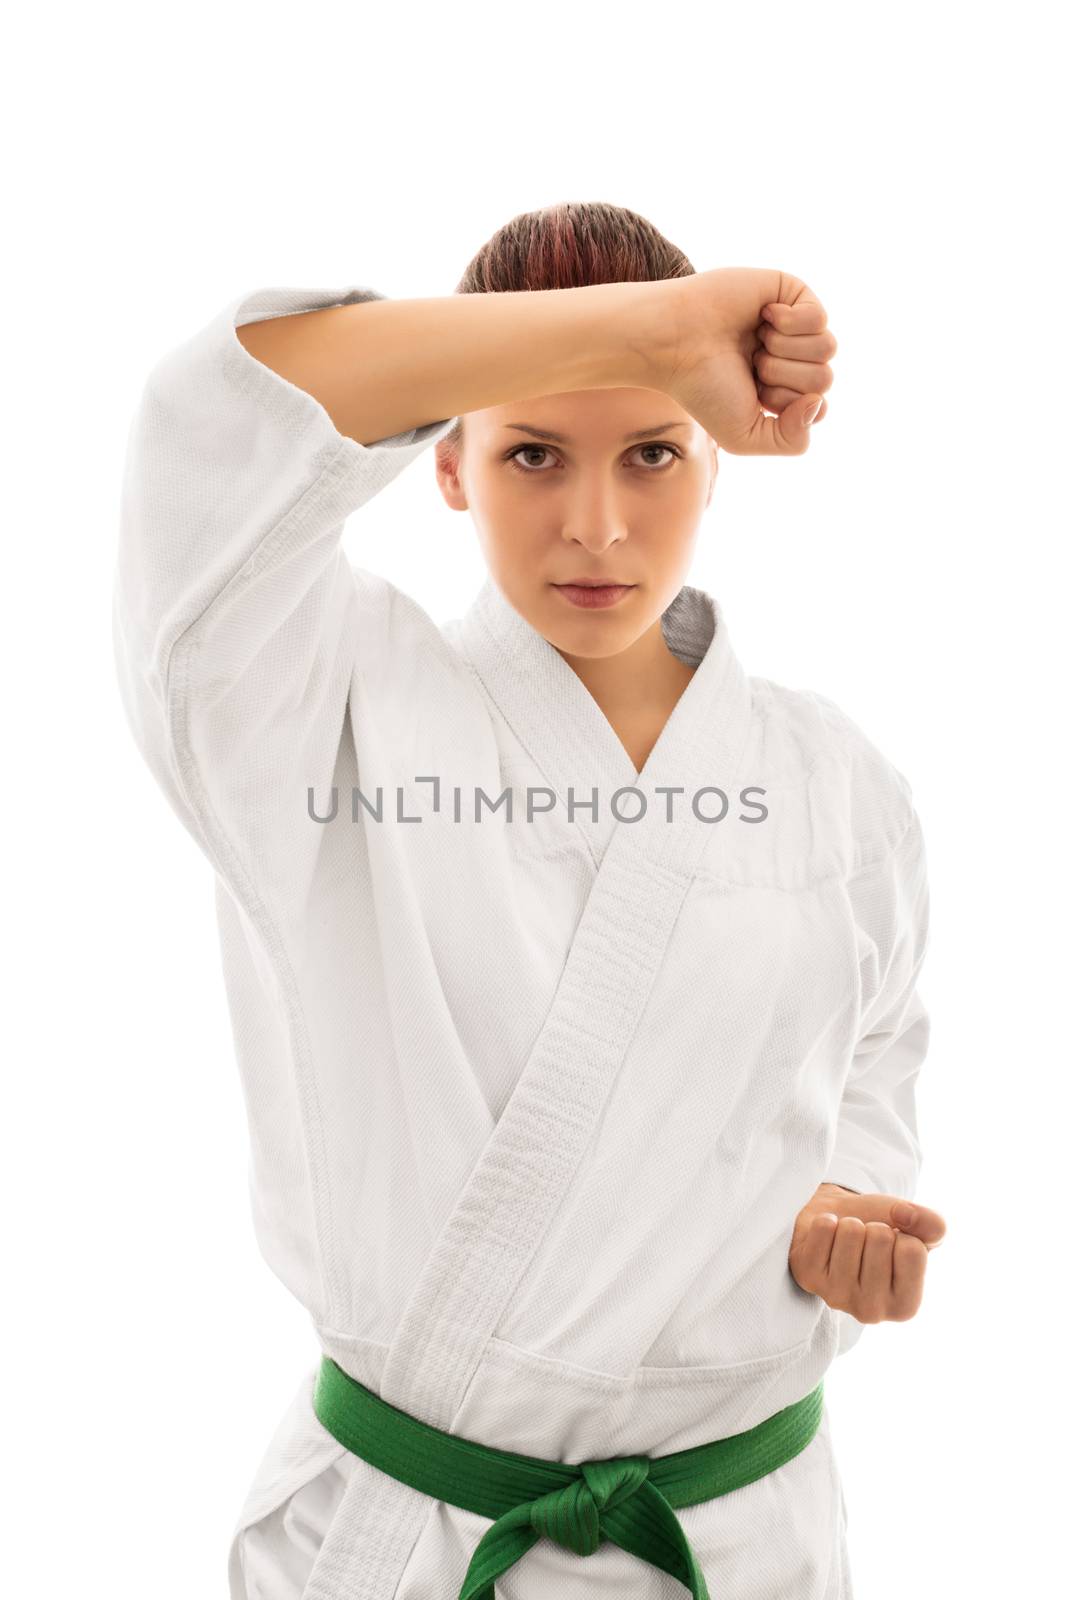 Blocked. Young girl in kimono with green belt taking defensive stance, isolated on white background.